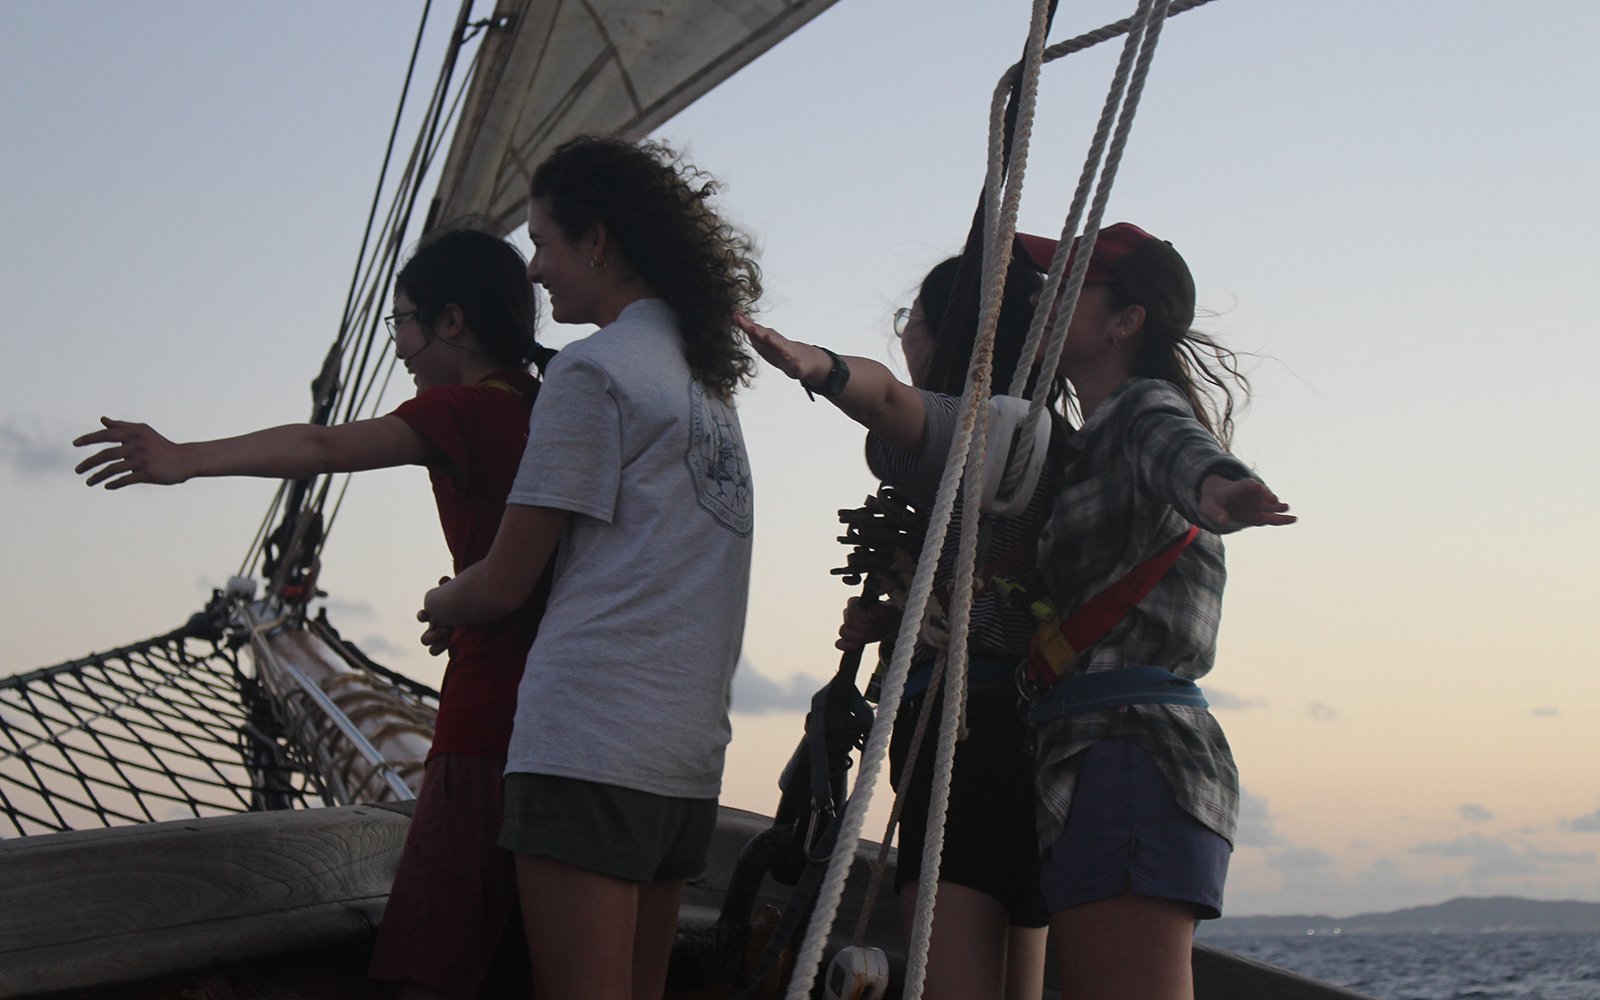 Students on sailboat